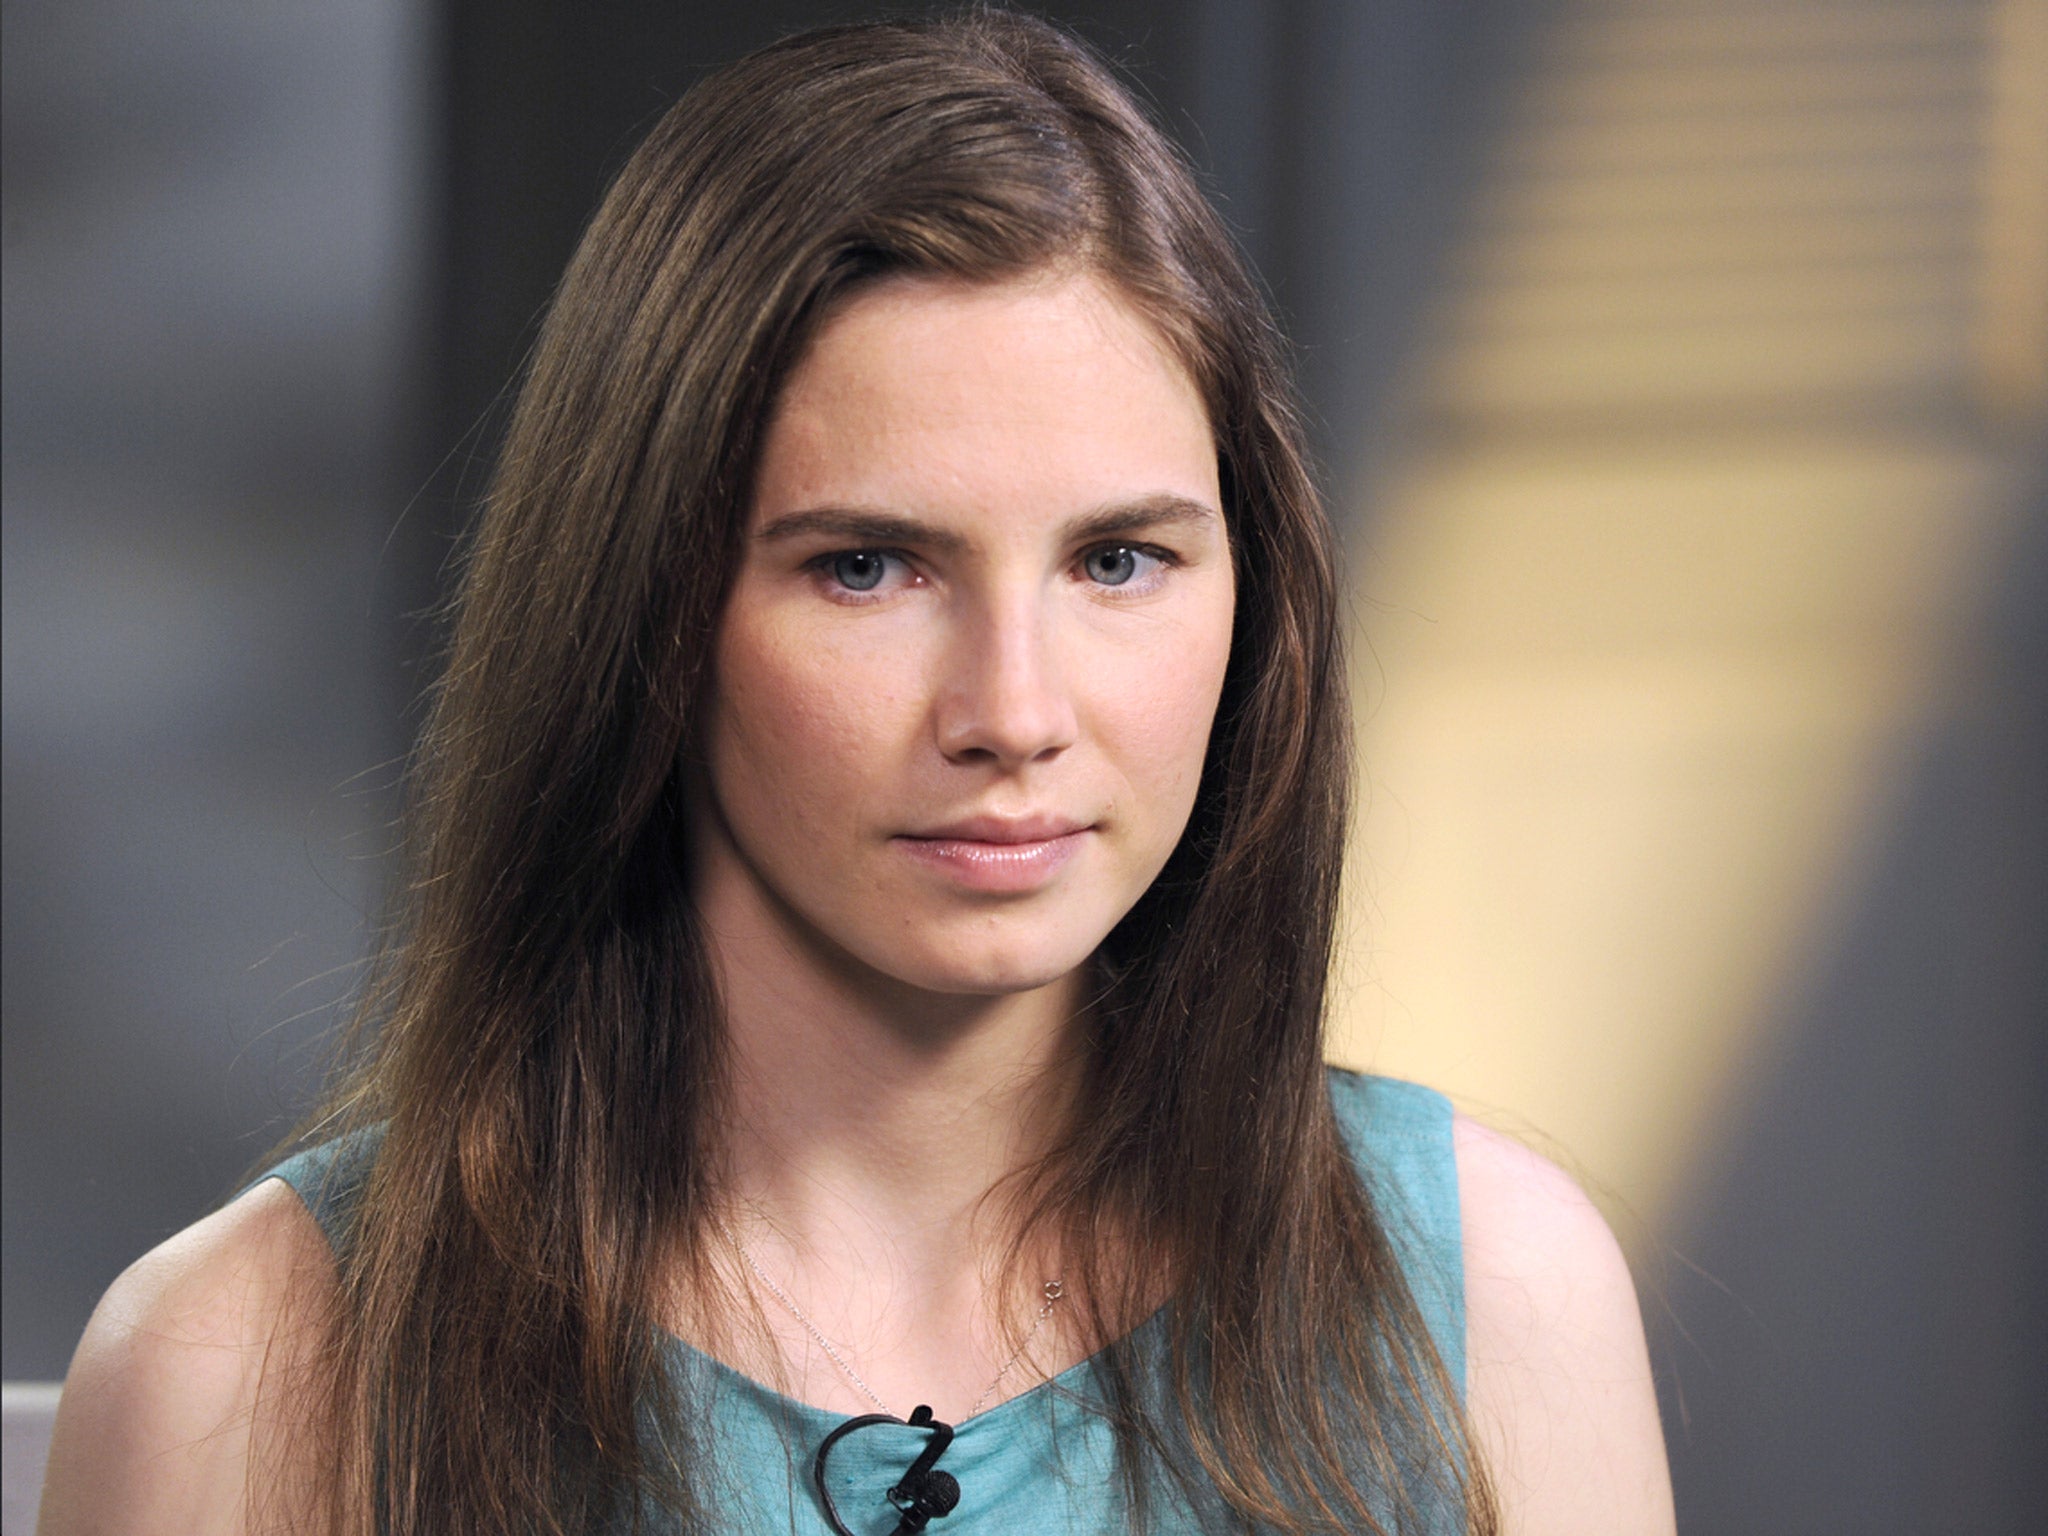 Amanda Knox served two years in prison